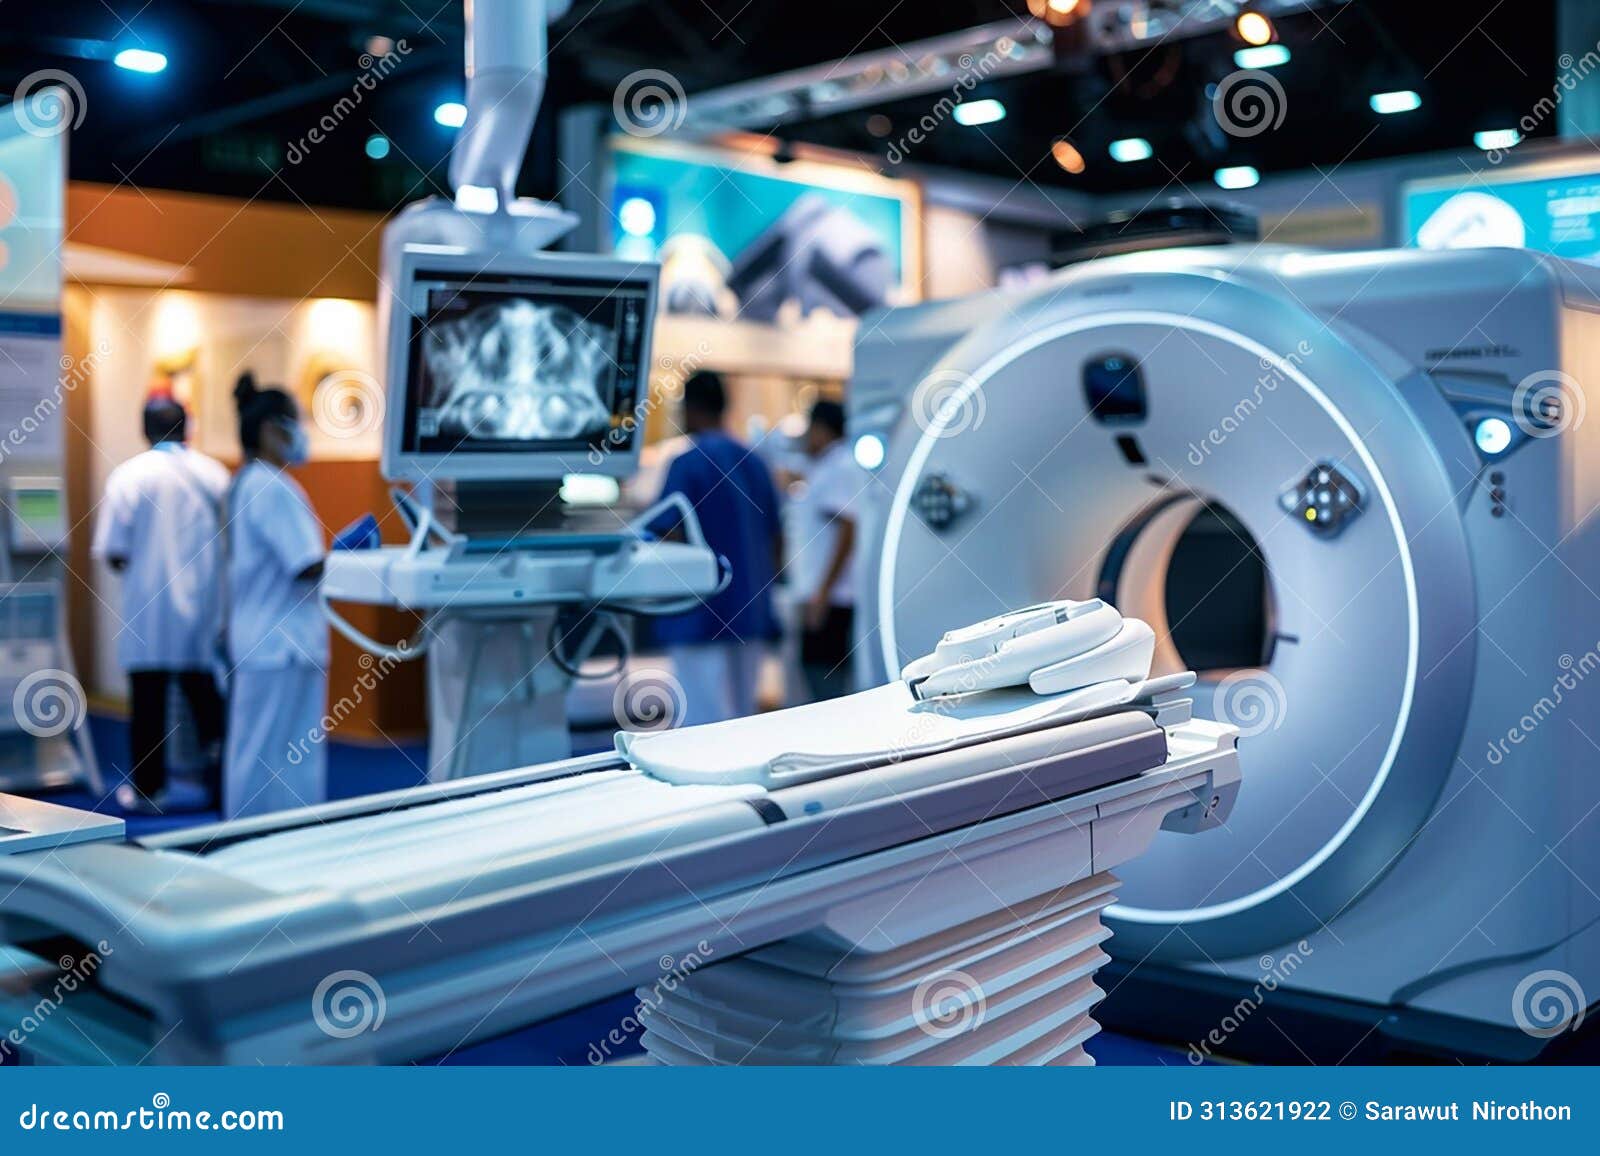 medical technology, showcase cutting-edge medical equipment, mri, machines, robotic surgical systems